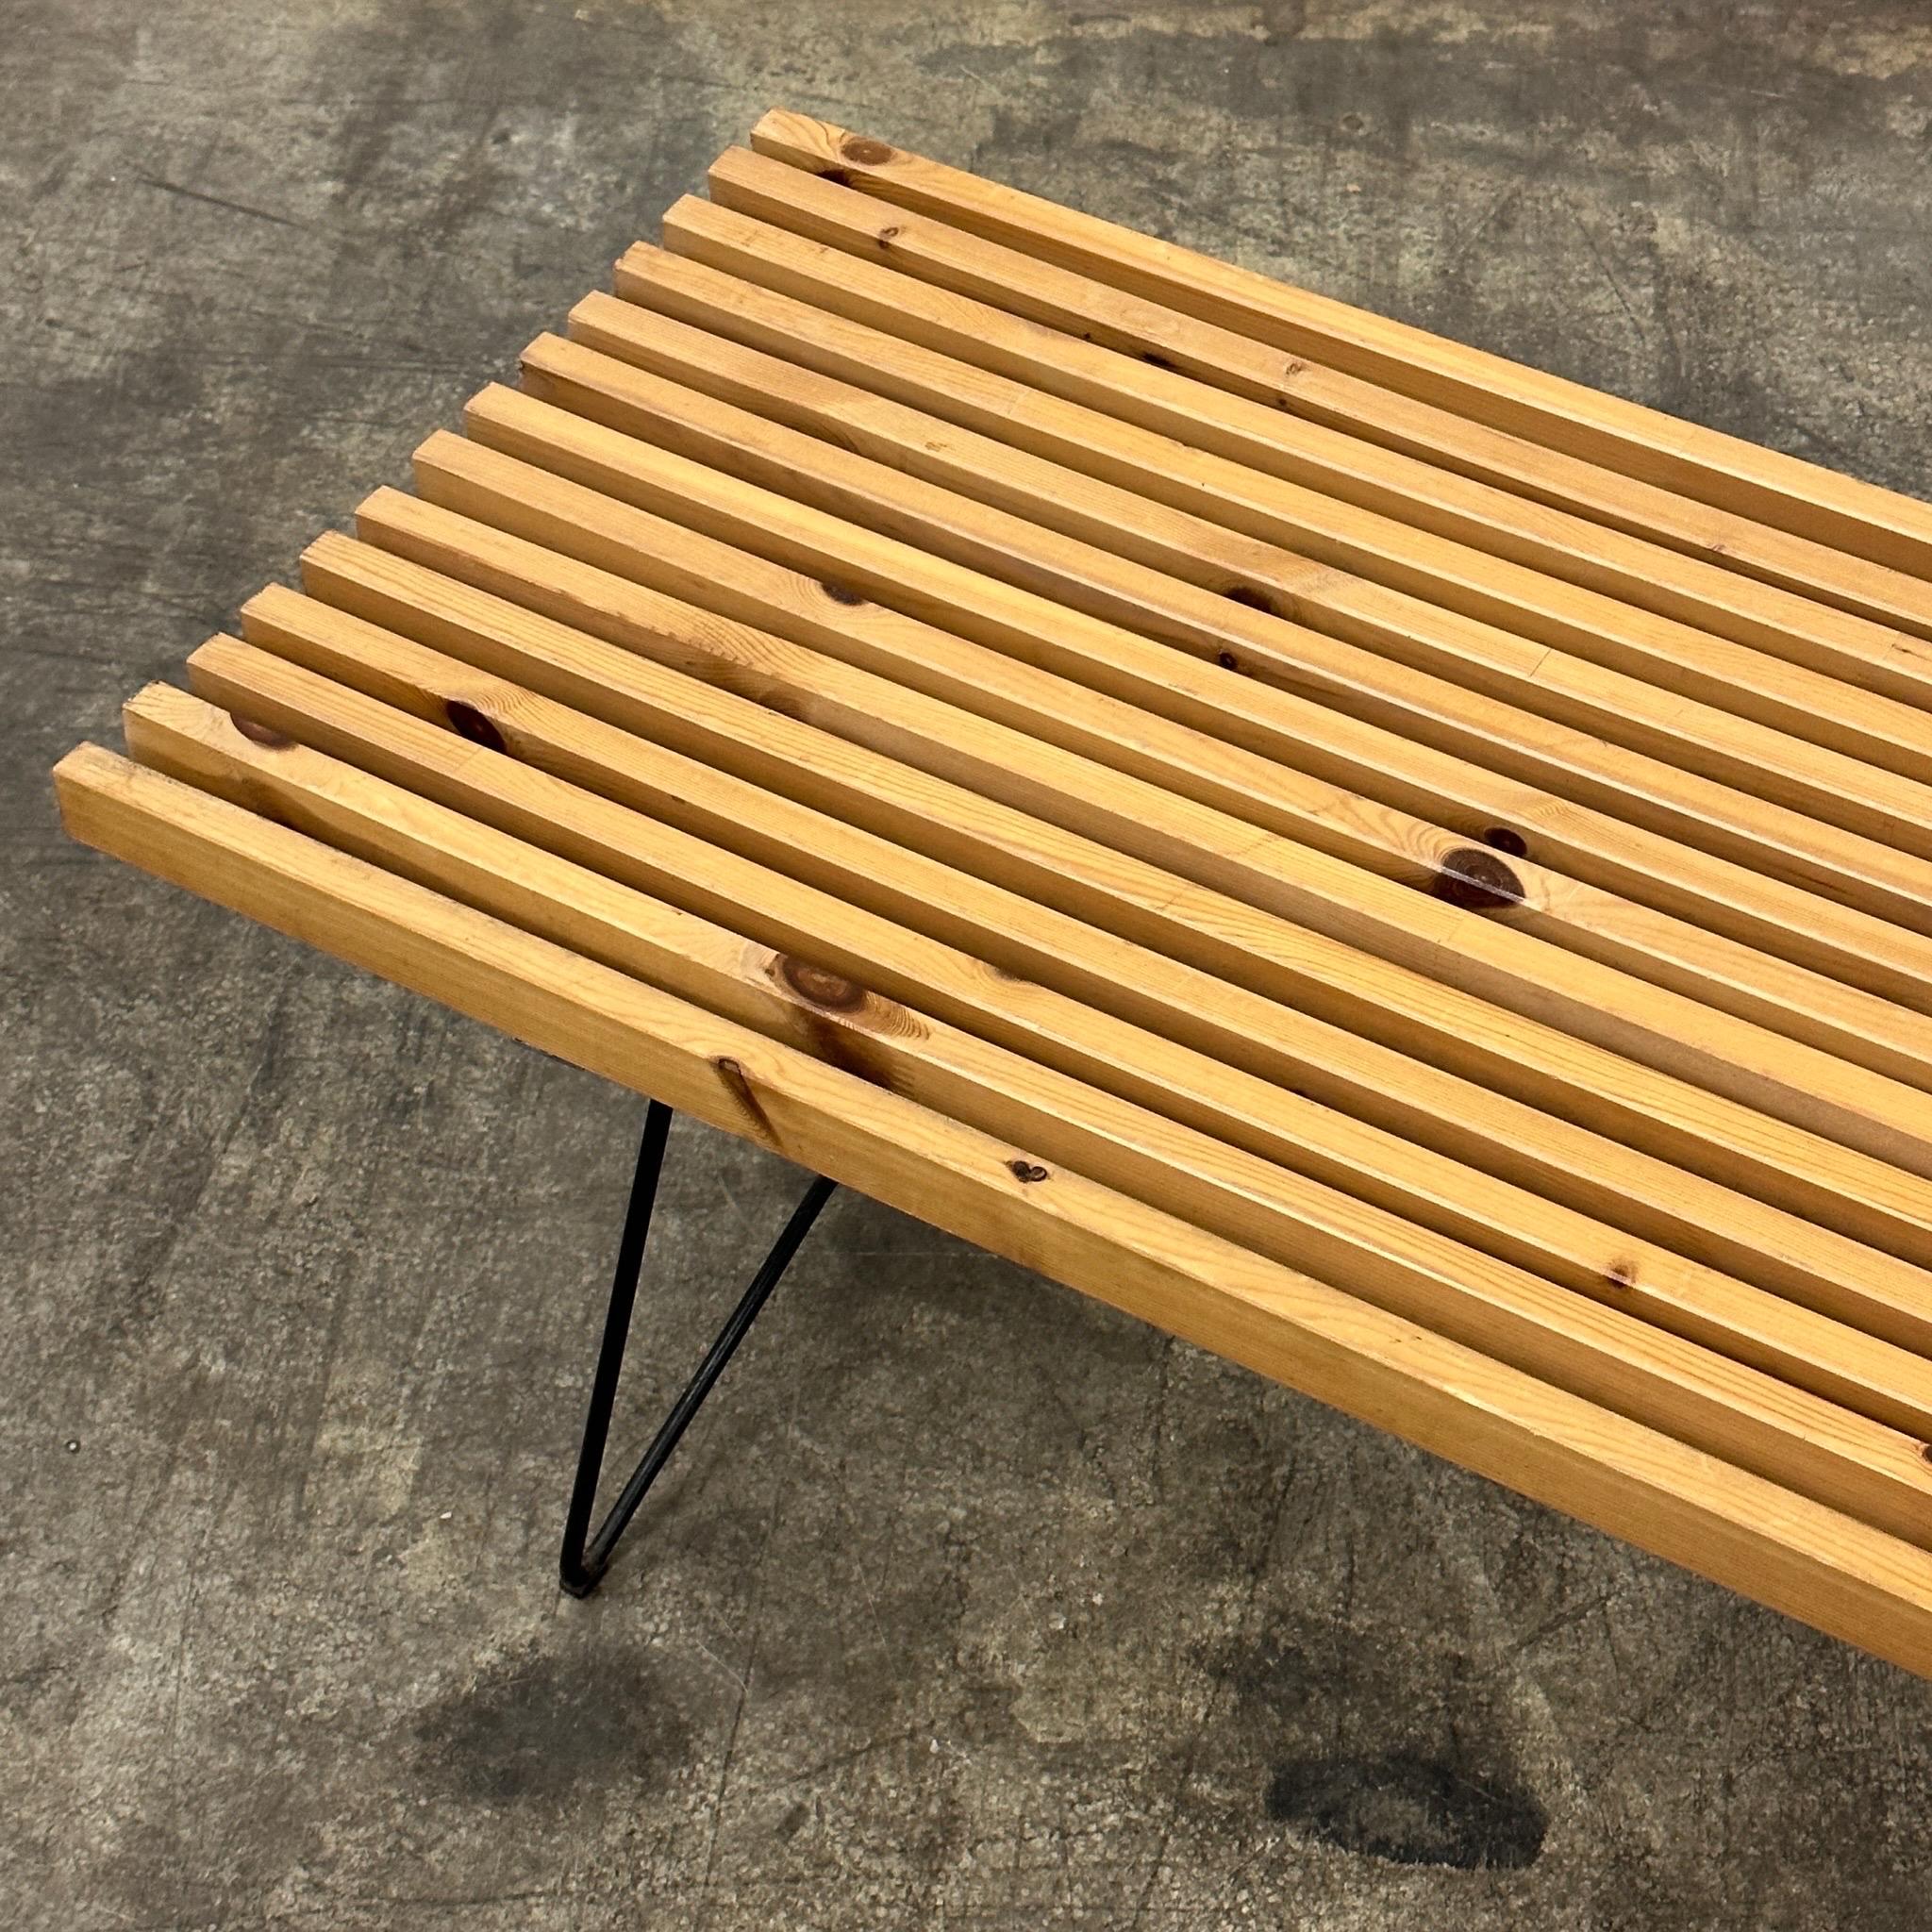 c. Unknown. Wood slats on metal wire frame. Reminiscent of Bertoia slat bench. 